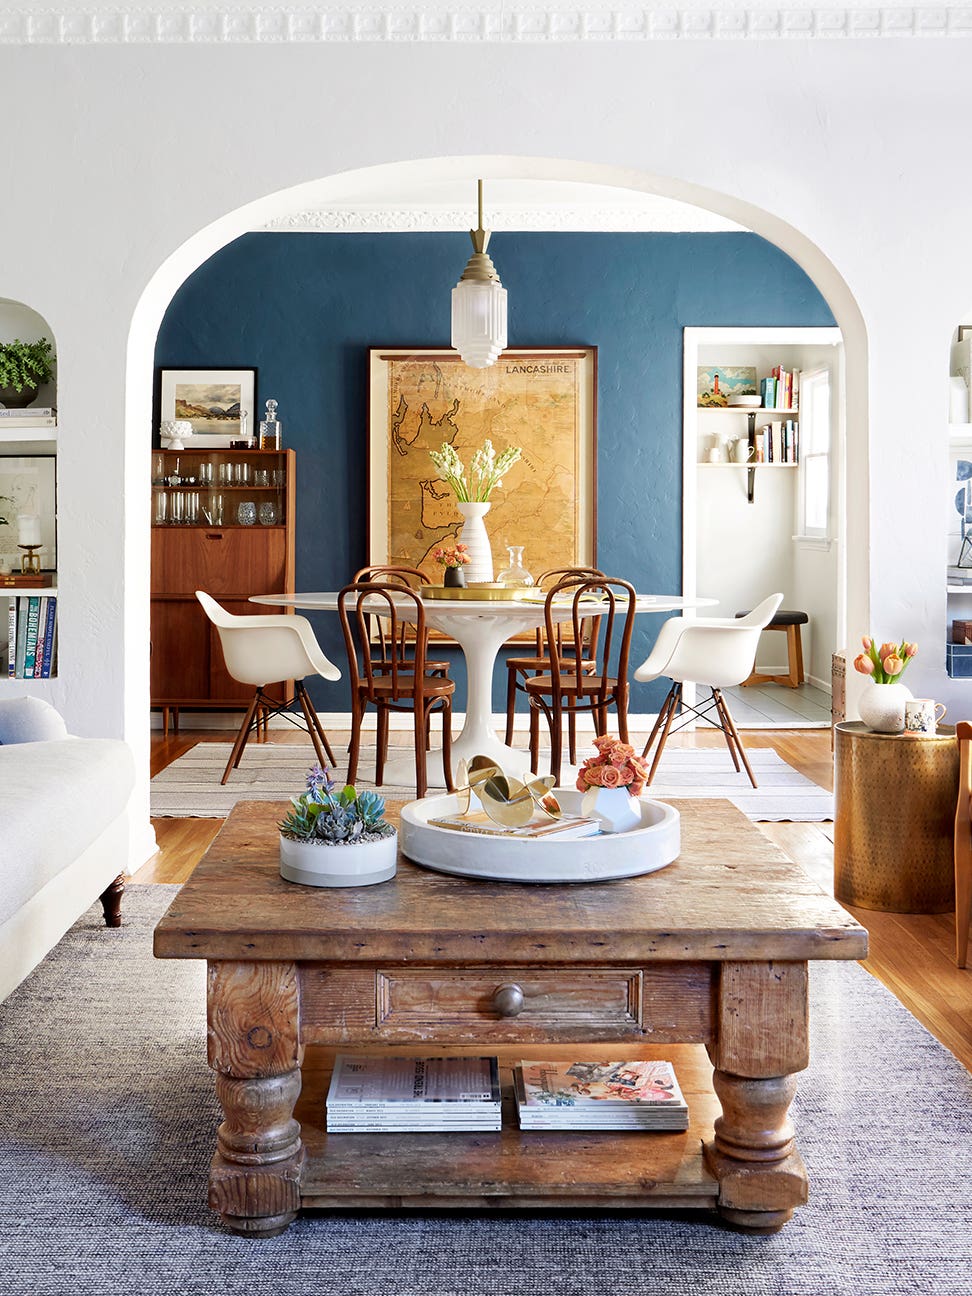 Dining room with rustic furniture and blue painted accent wall.